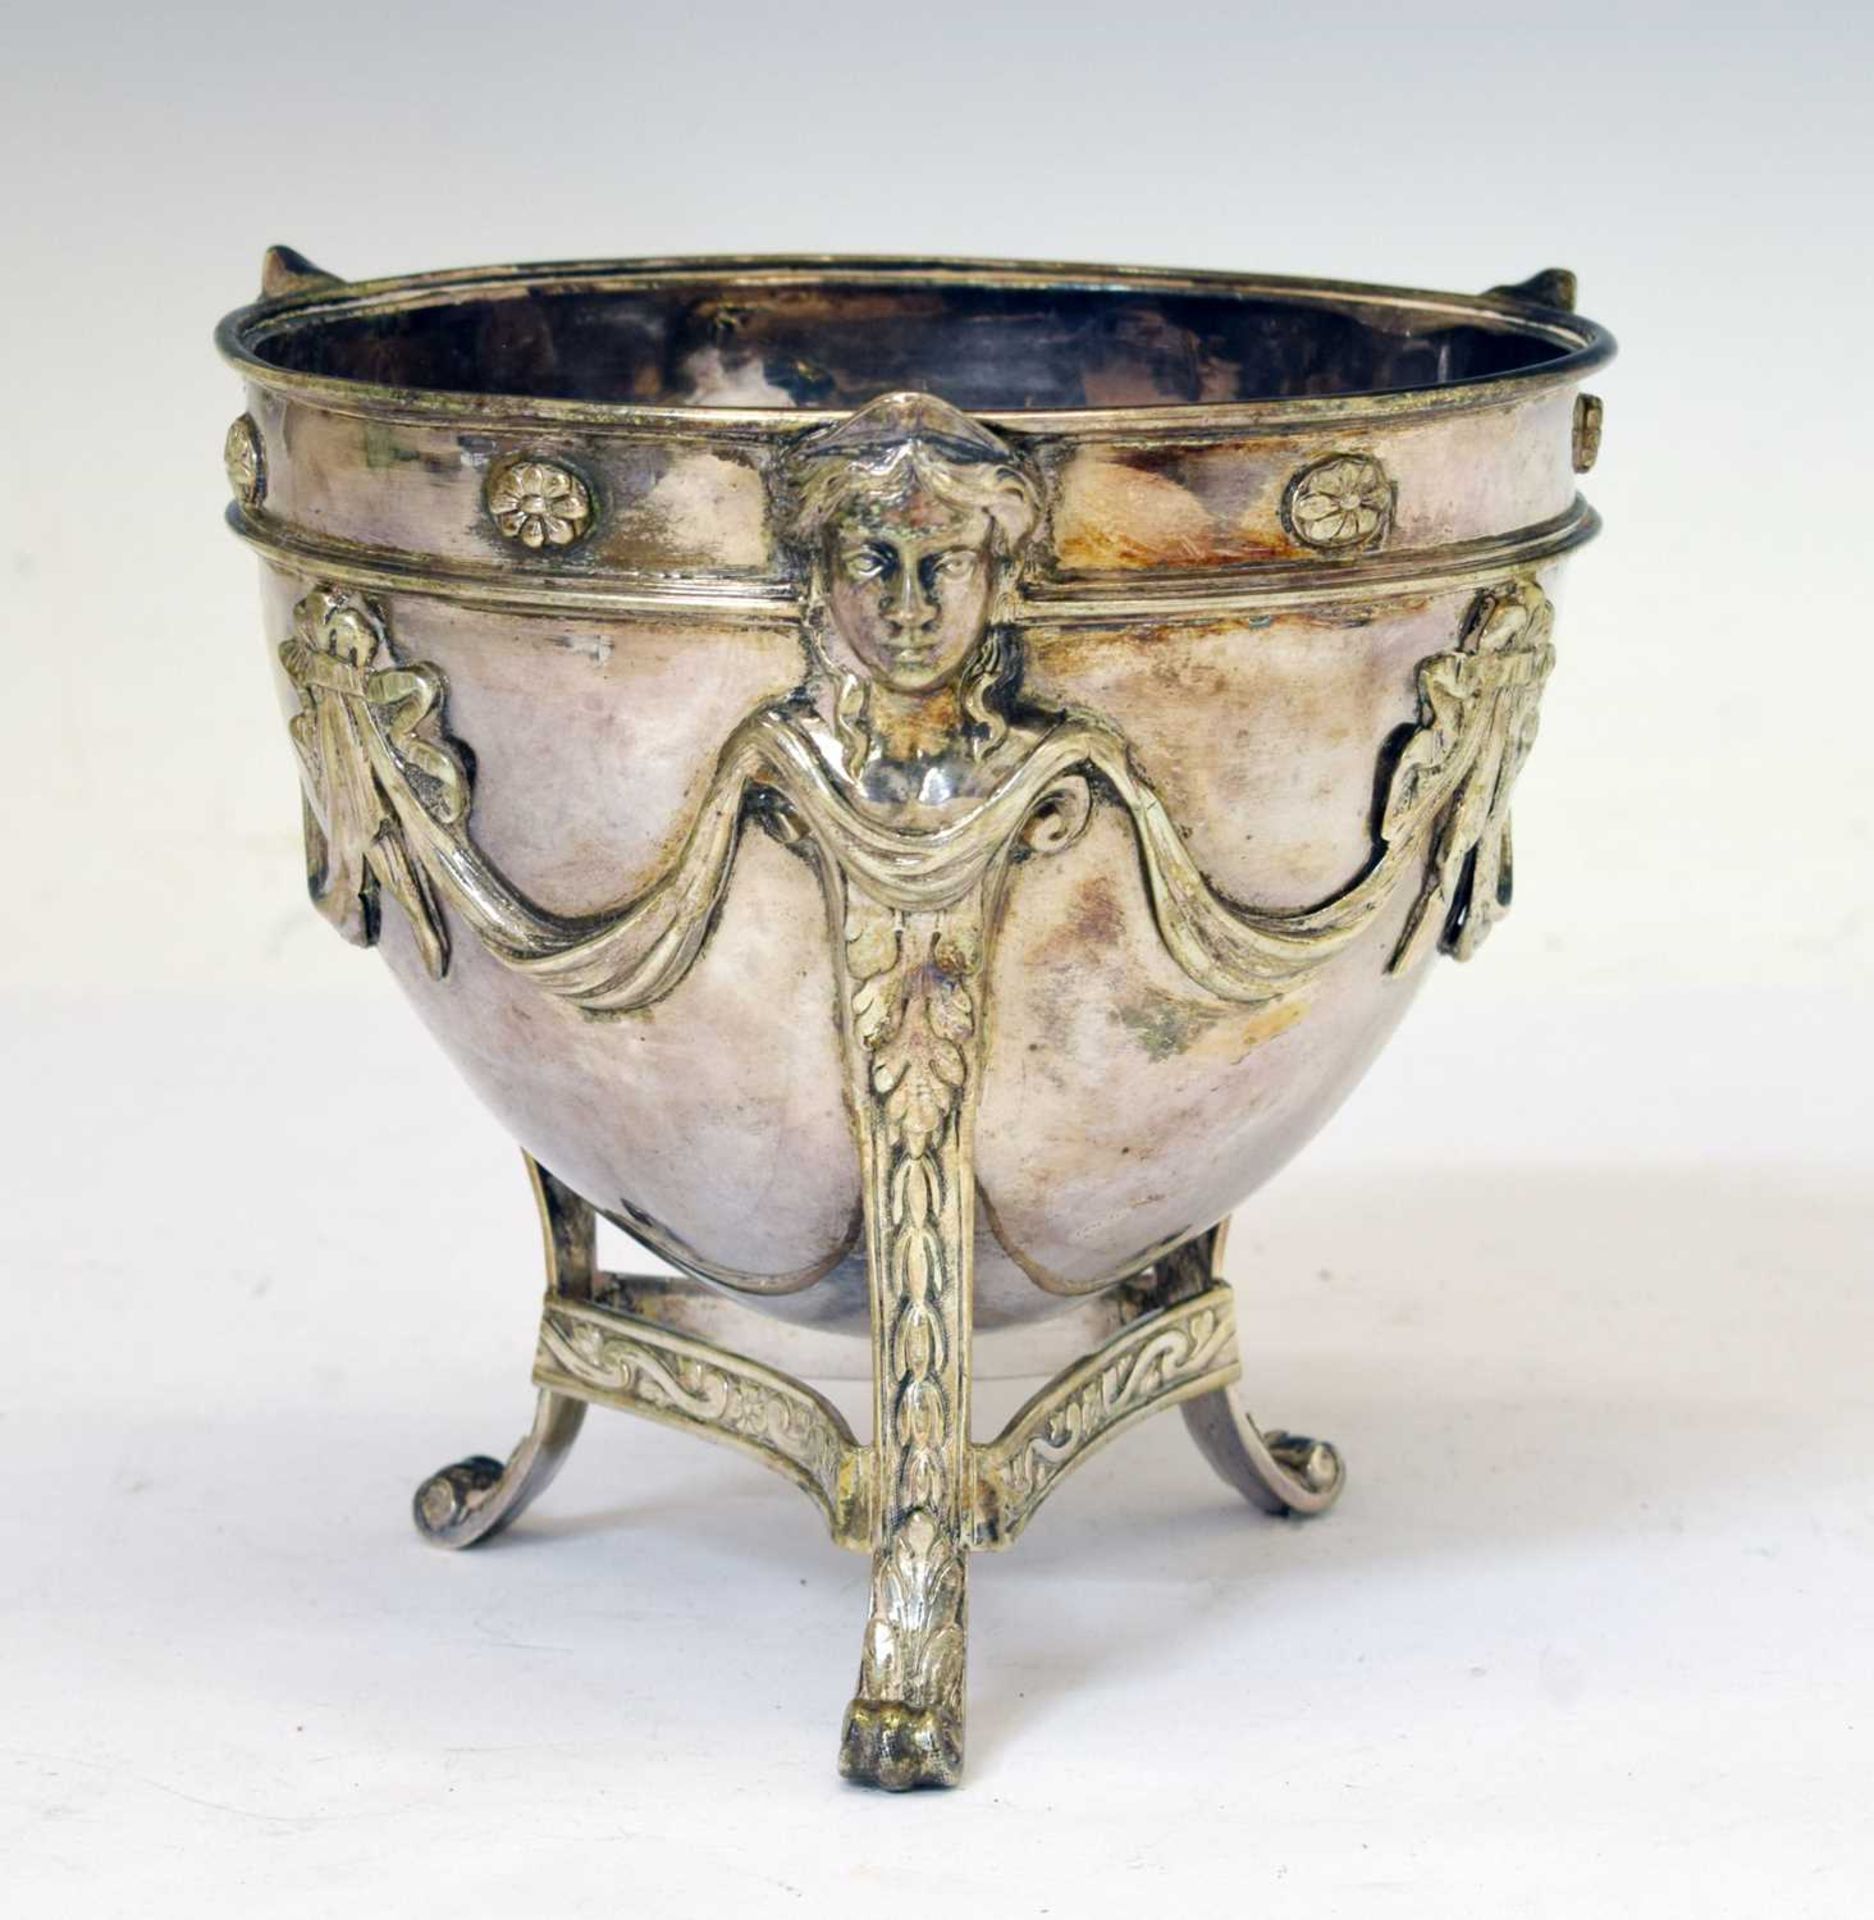 George III silver footed bowl with neo-classical decoration